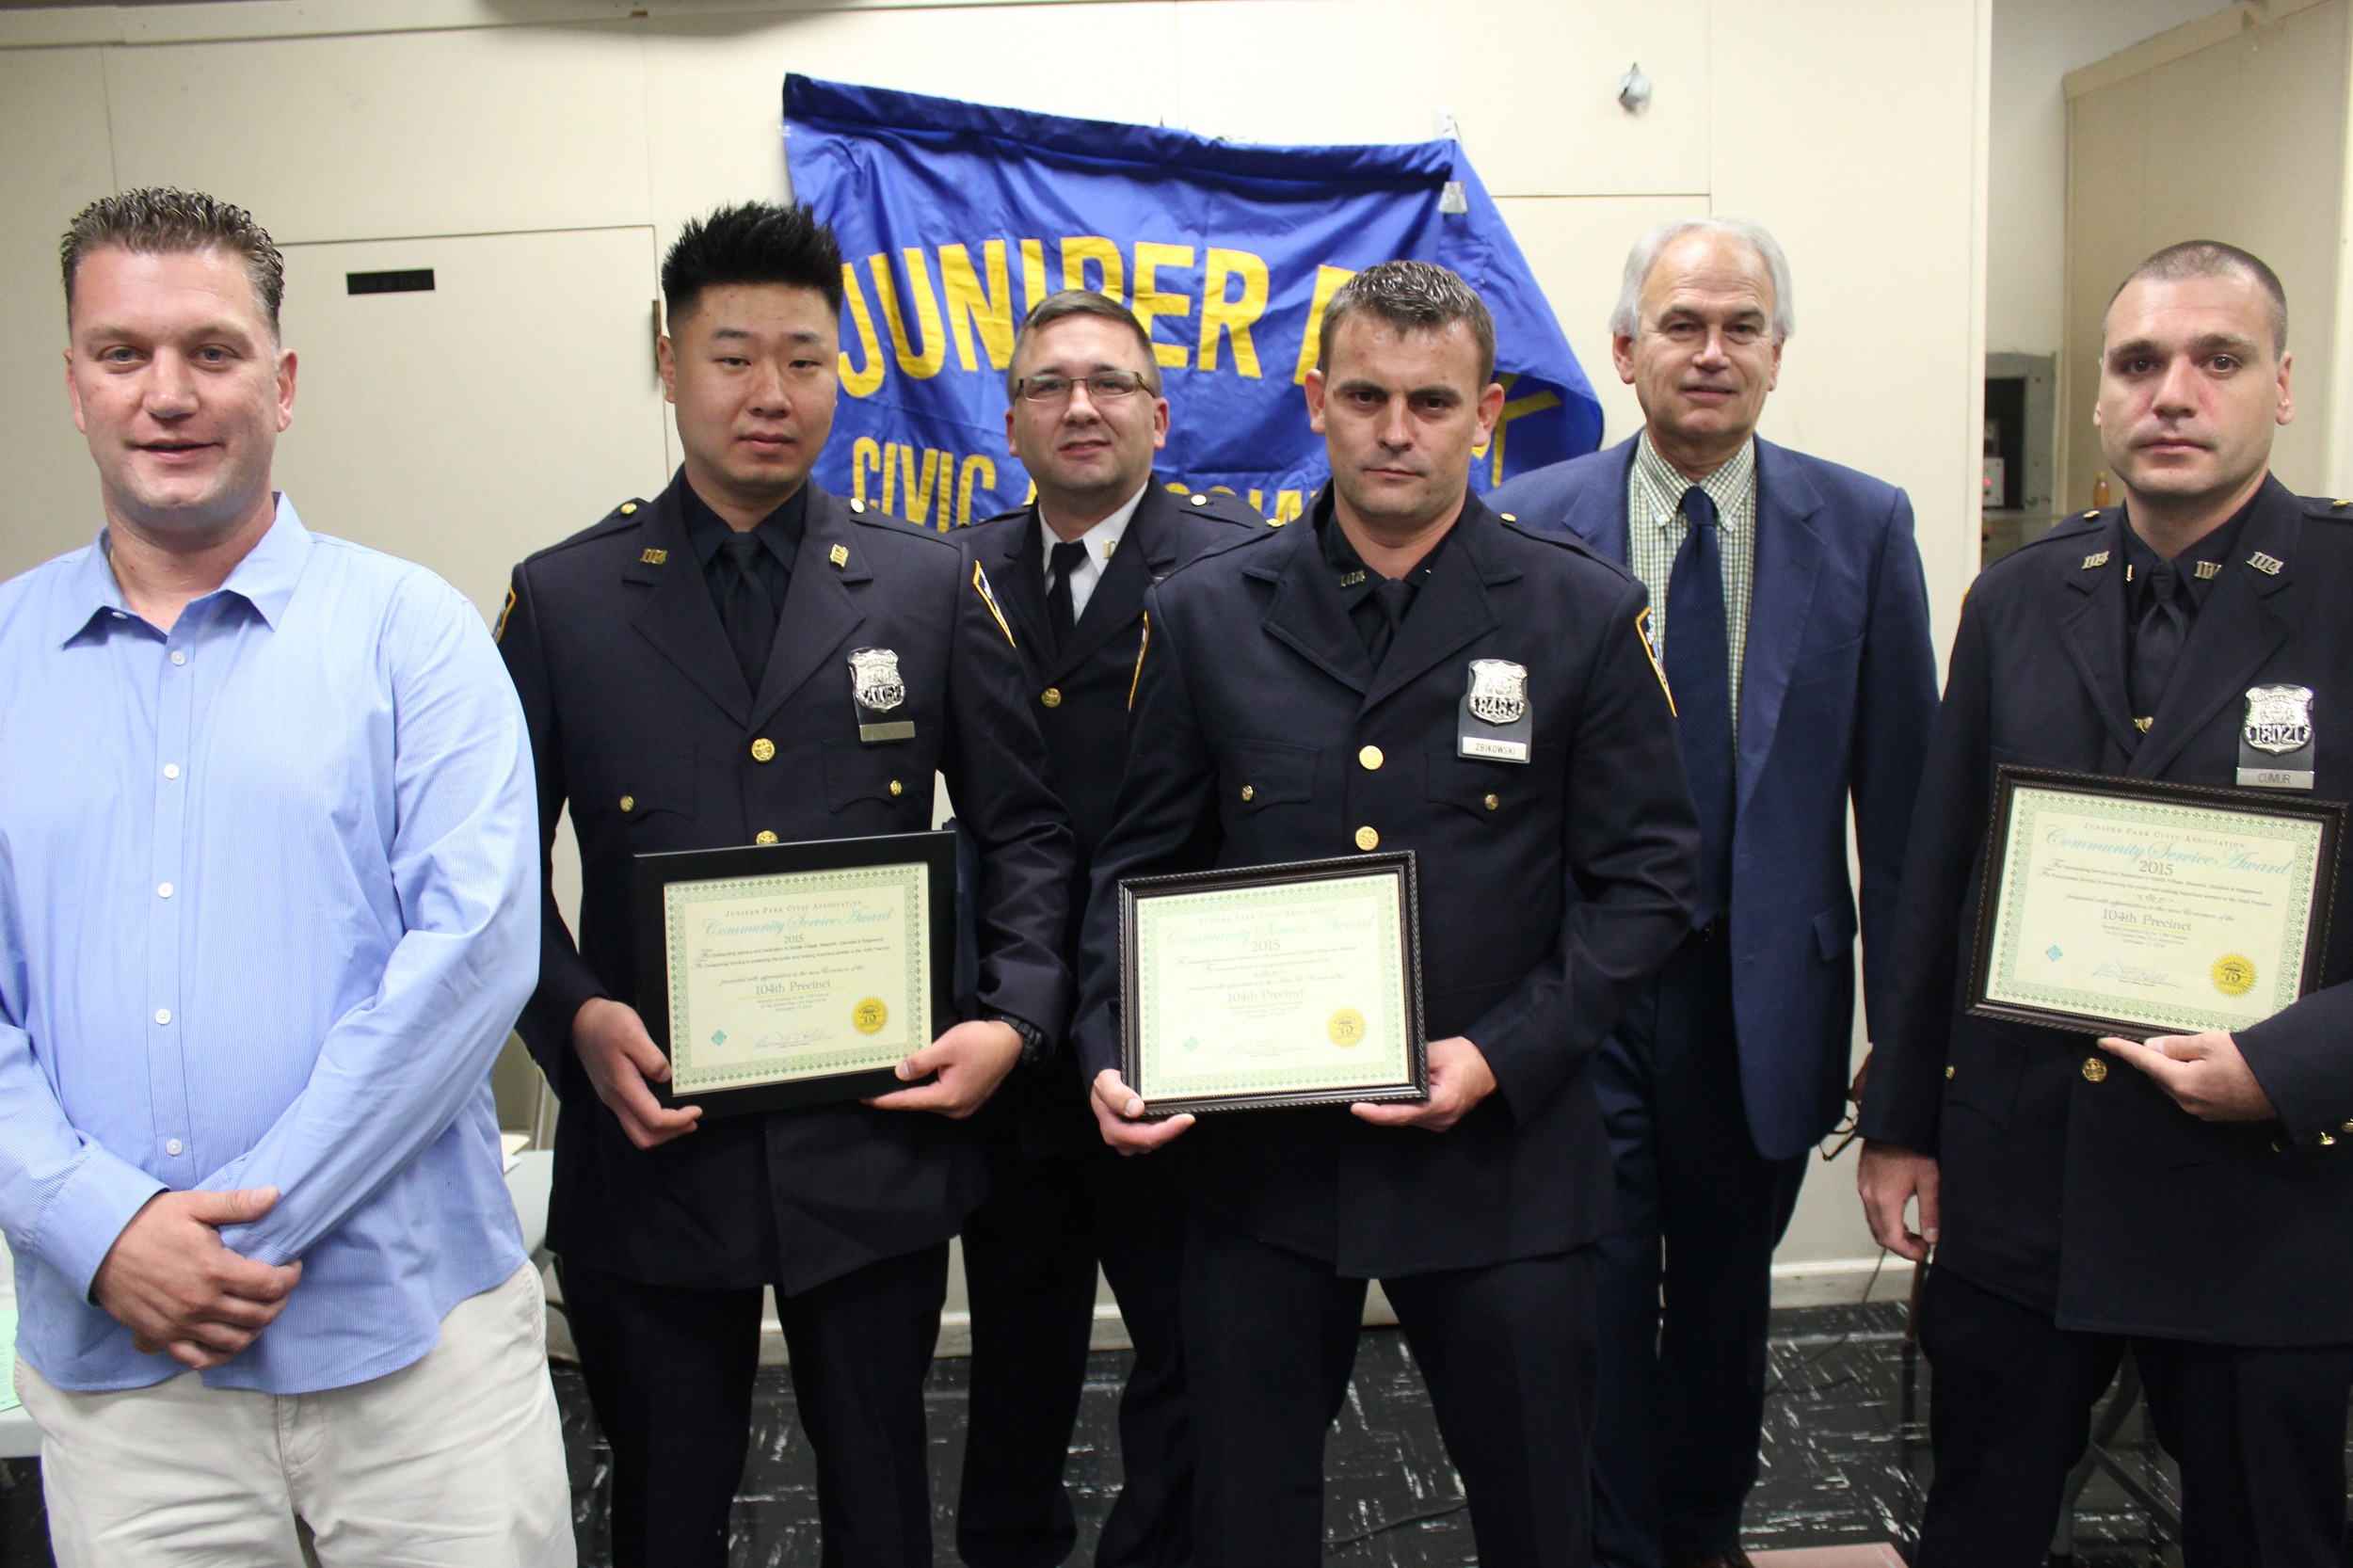 (l to r) Resident Brian McGoldrick , Officer Jonathan Ku, Captain Mark Wachter, Officer Onur Cumur and Officer Radoslaw Zbikowski were honored by JPCA President Robert Holden for their arrest of car thieves in Middle Village in August.